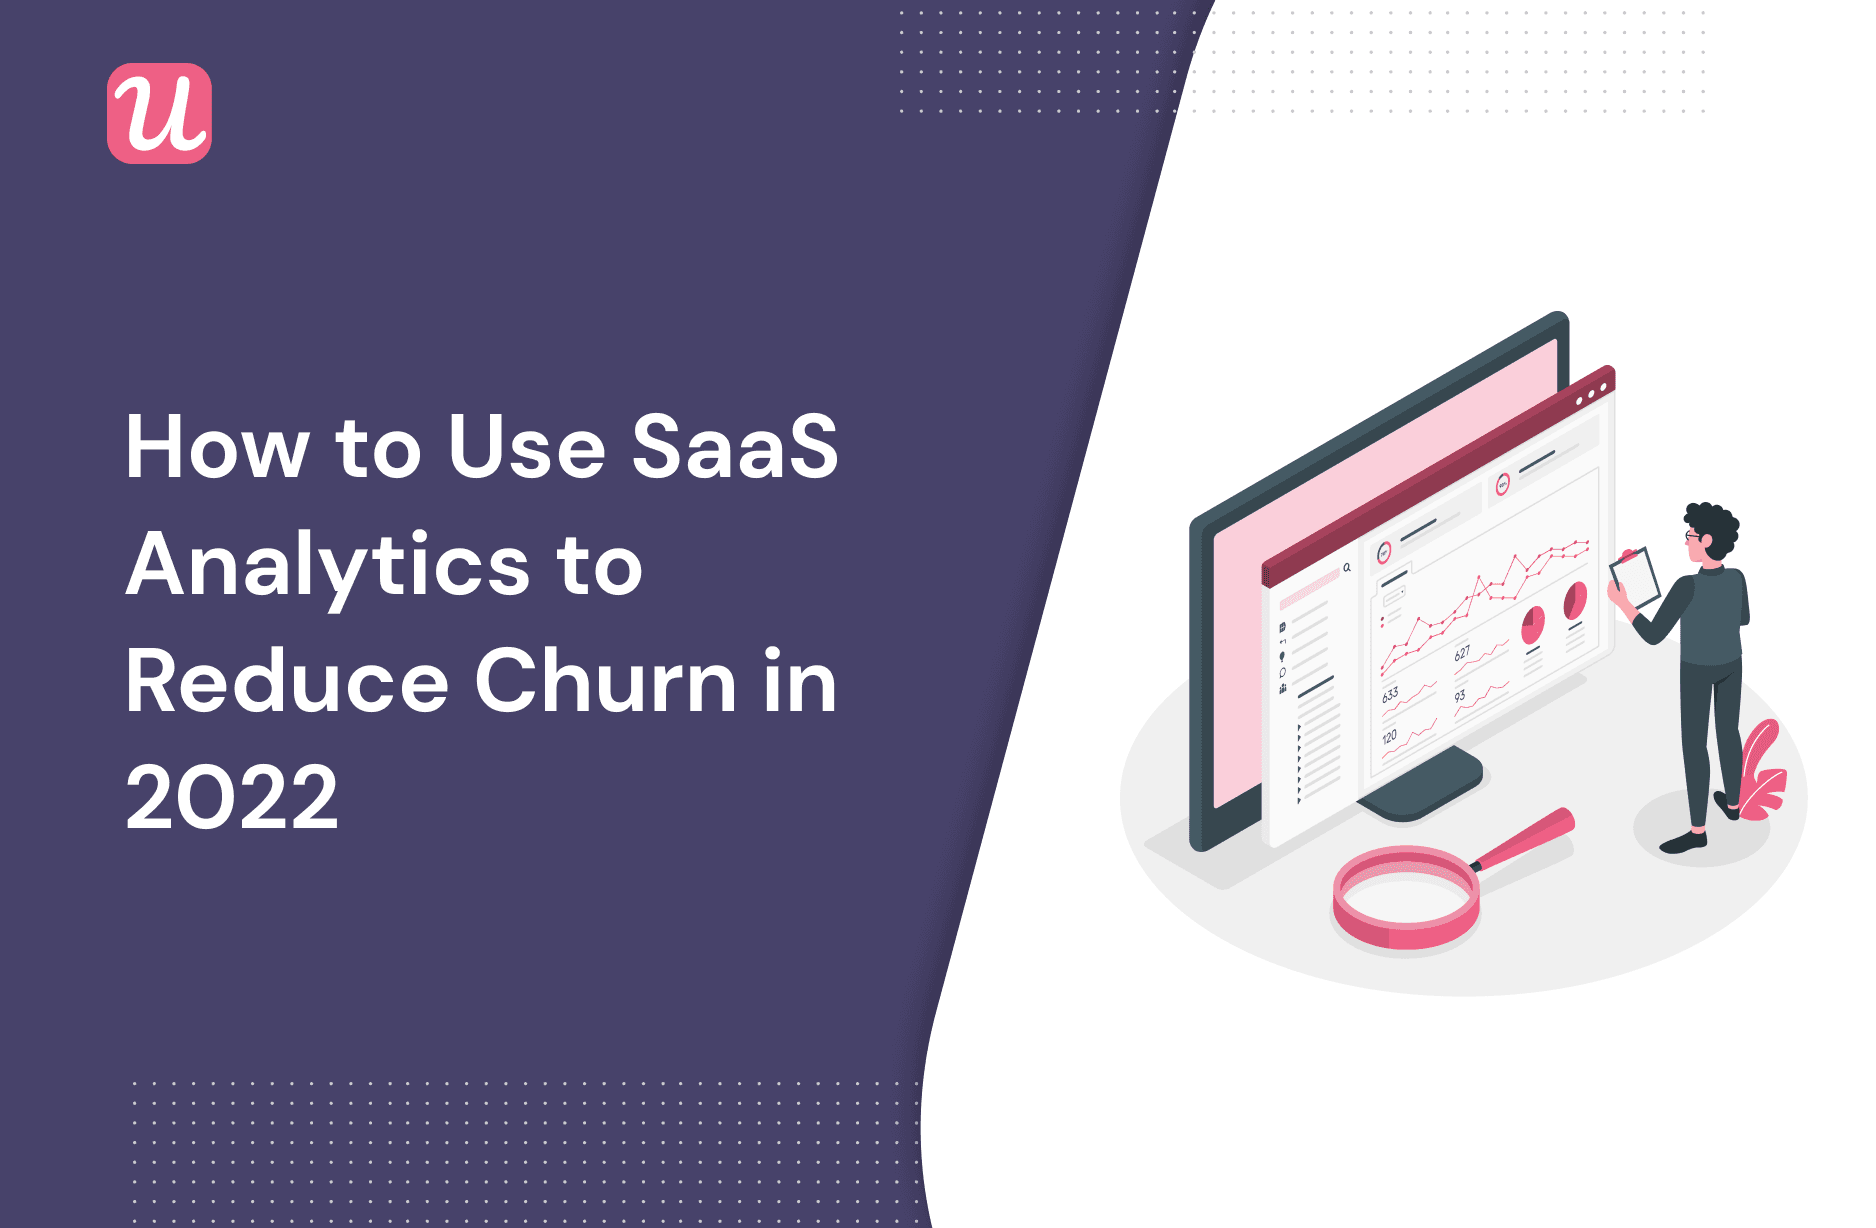 How to use SaaS analytics to reduce churn in 2022